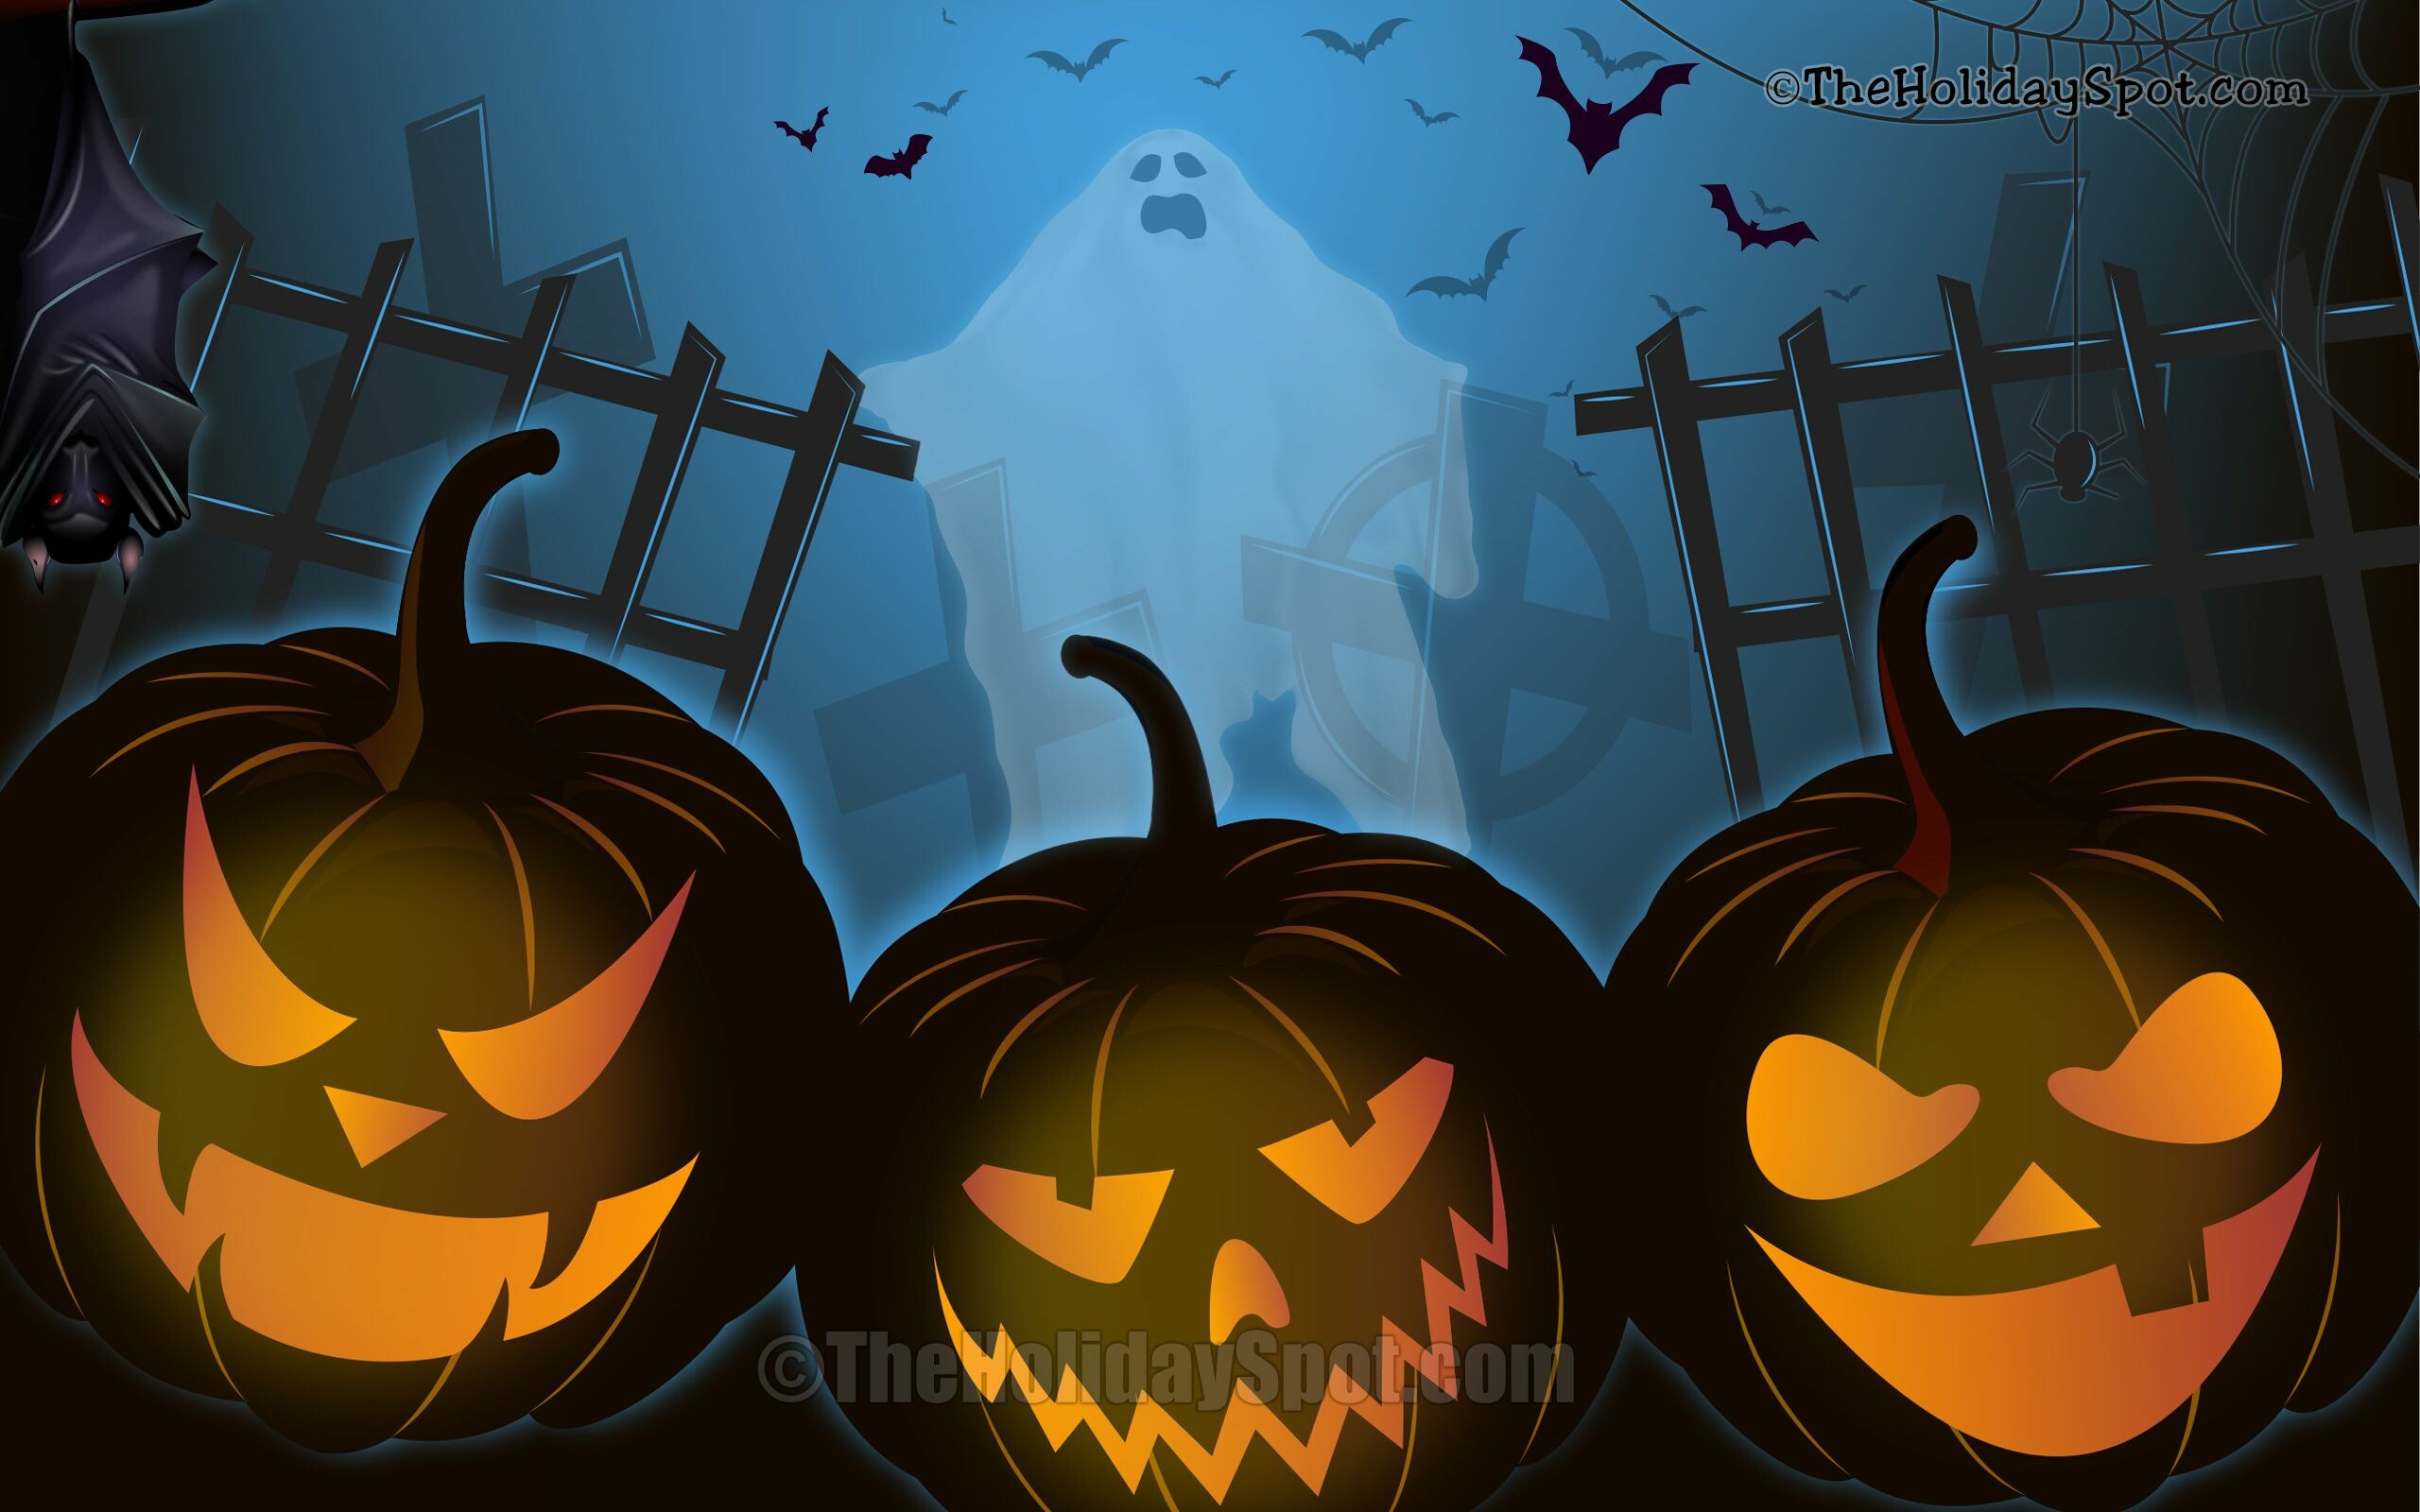 75+ Halloween Wallpapers: HD, 4K, 5K for PC and Mobile | Download free  images for iPhone, Android